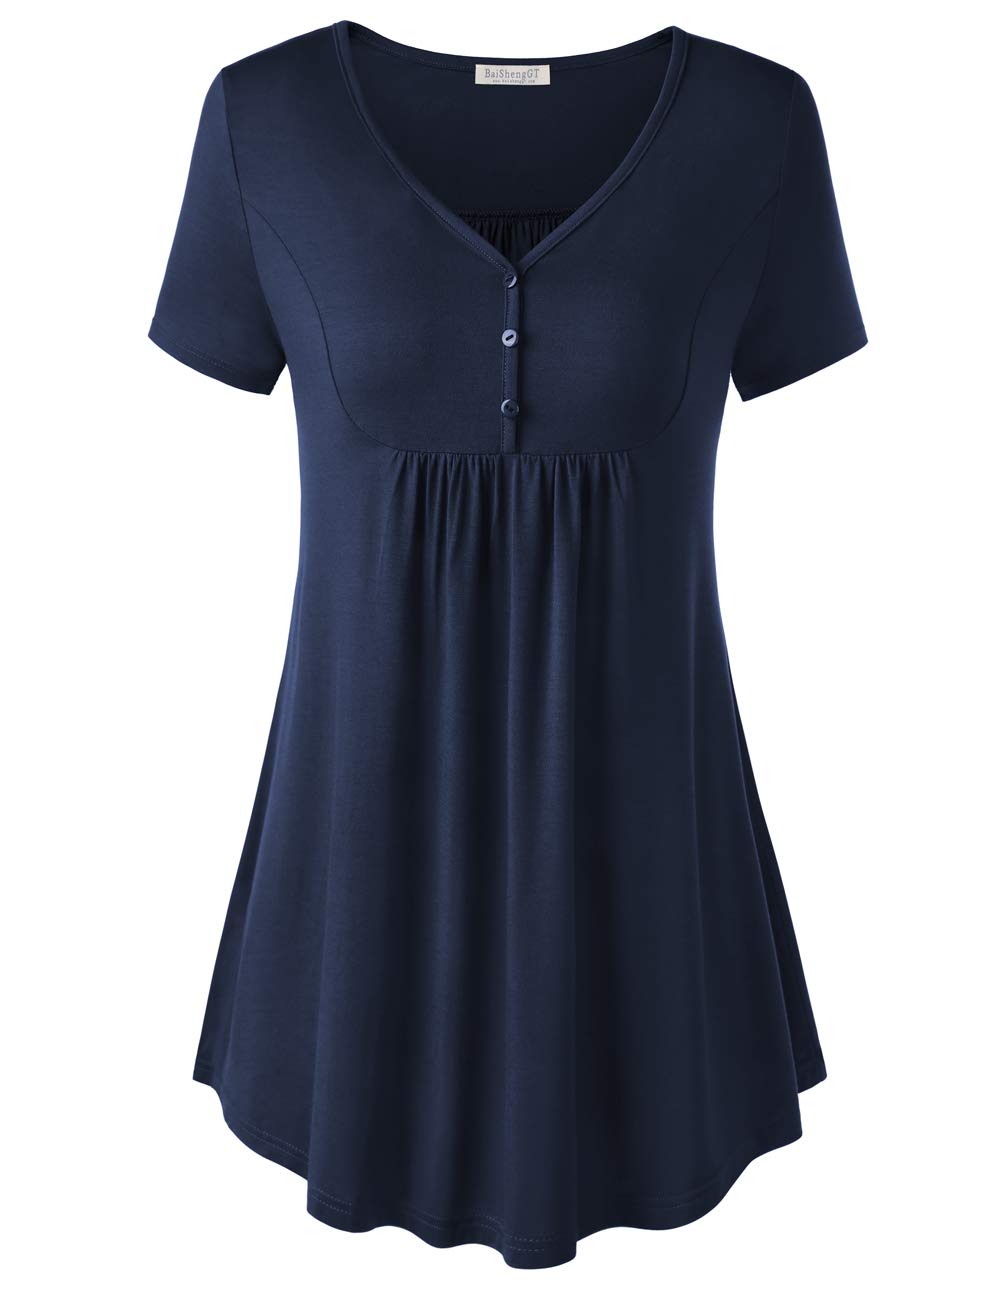 BAISHENGGT Women's Navy Blue V Neck Buttons Pleated Flared Comfy Tunic Tops